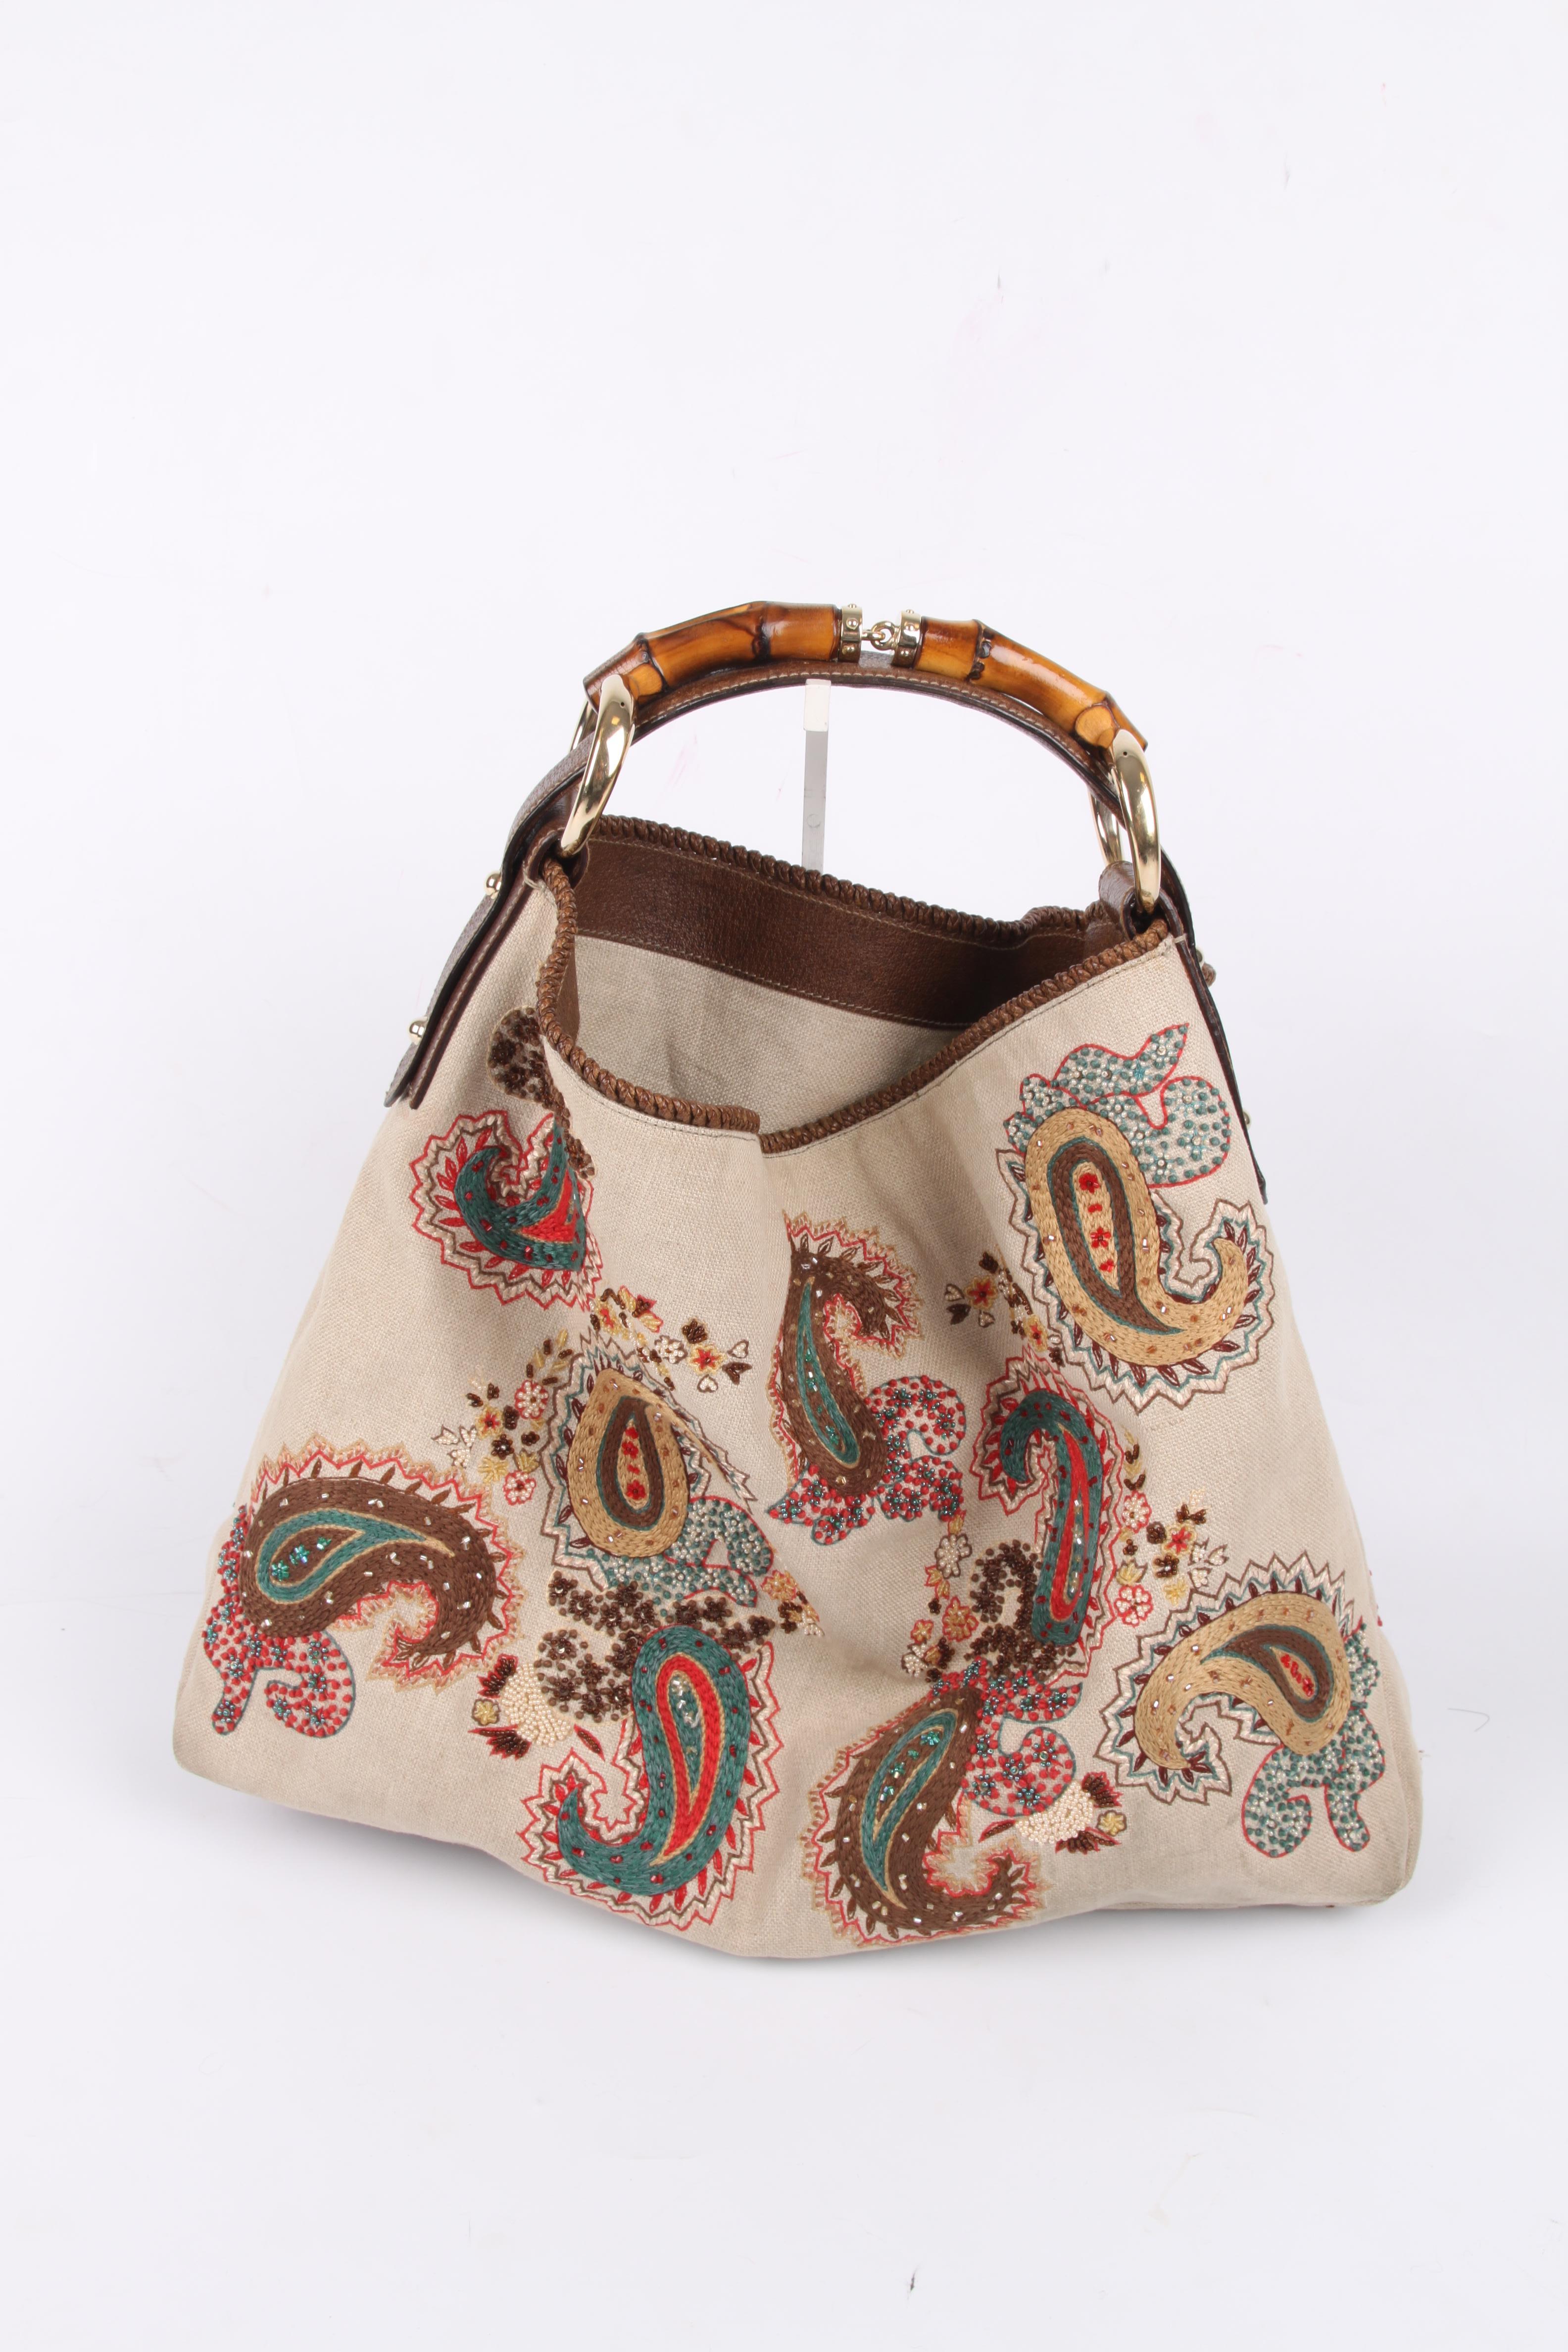 Gucci made this large embroidered canvas bag with bamboo handle.

A paisley design in red, beige, taupe and green is embroidered on the bag at the front, back and bottom.

On top some dark brown leather detailing and a bamboo handle with gold-tone